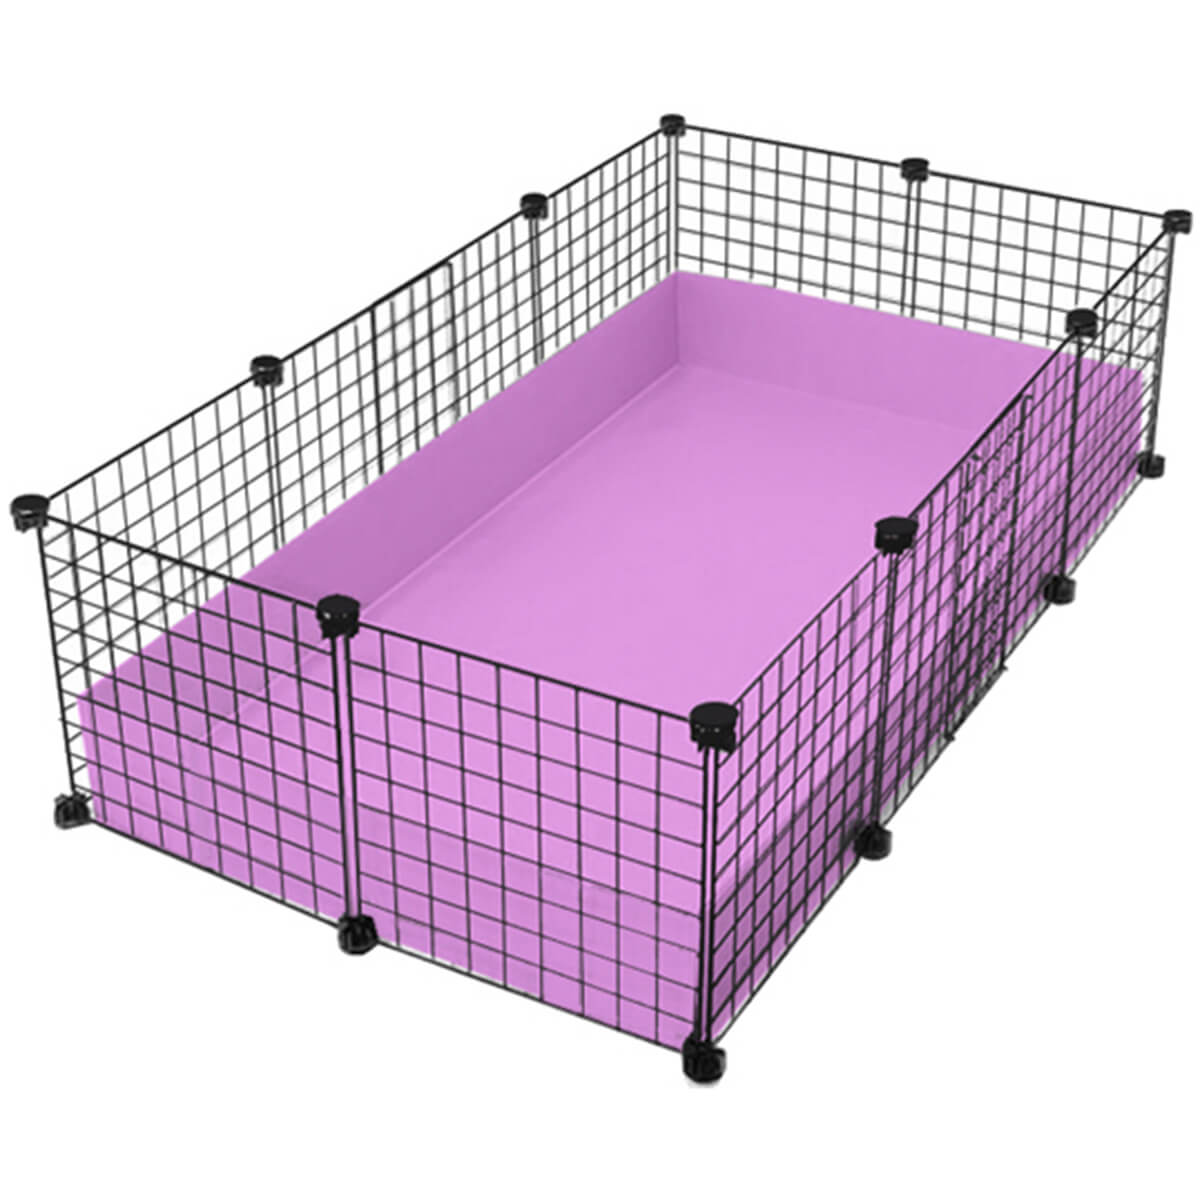 Medium (2x3.5 Grids) Cage - Standard Cages - C&C Cages for ...